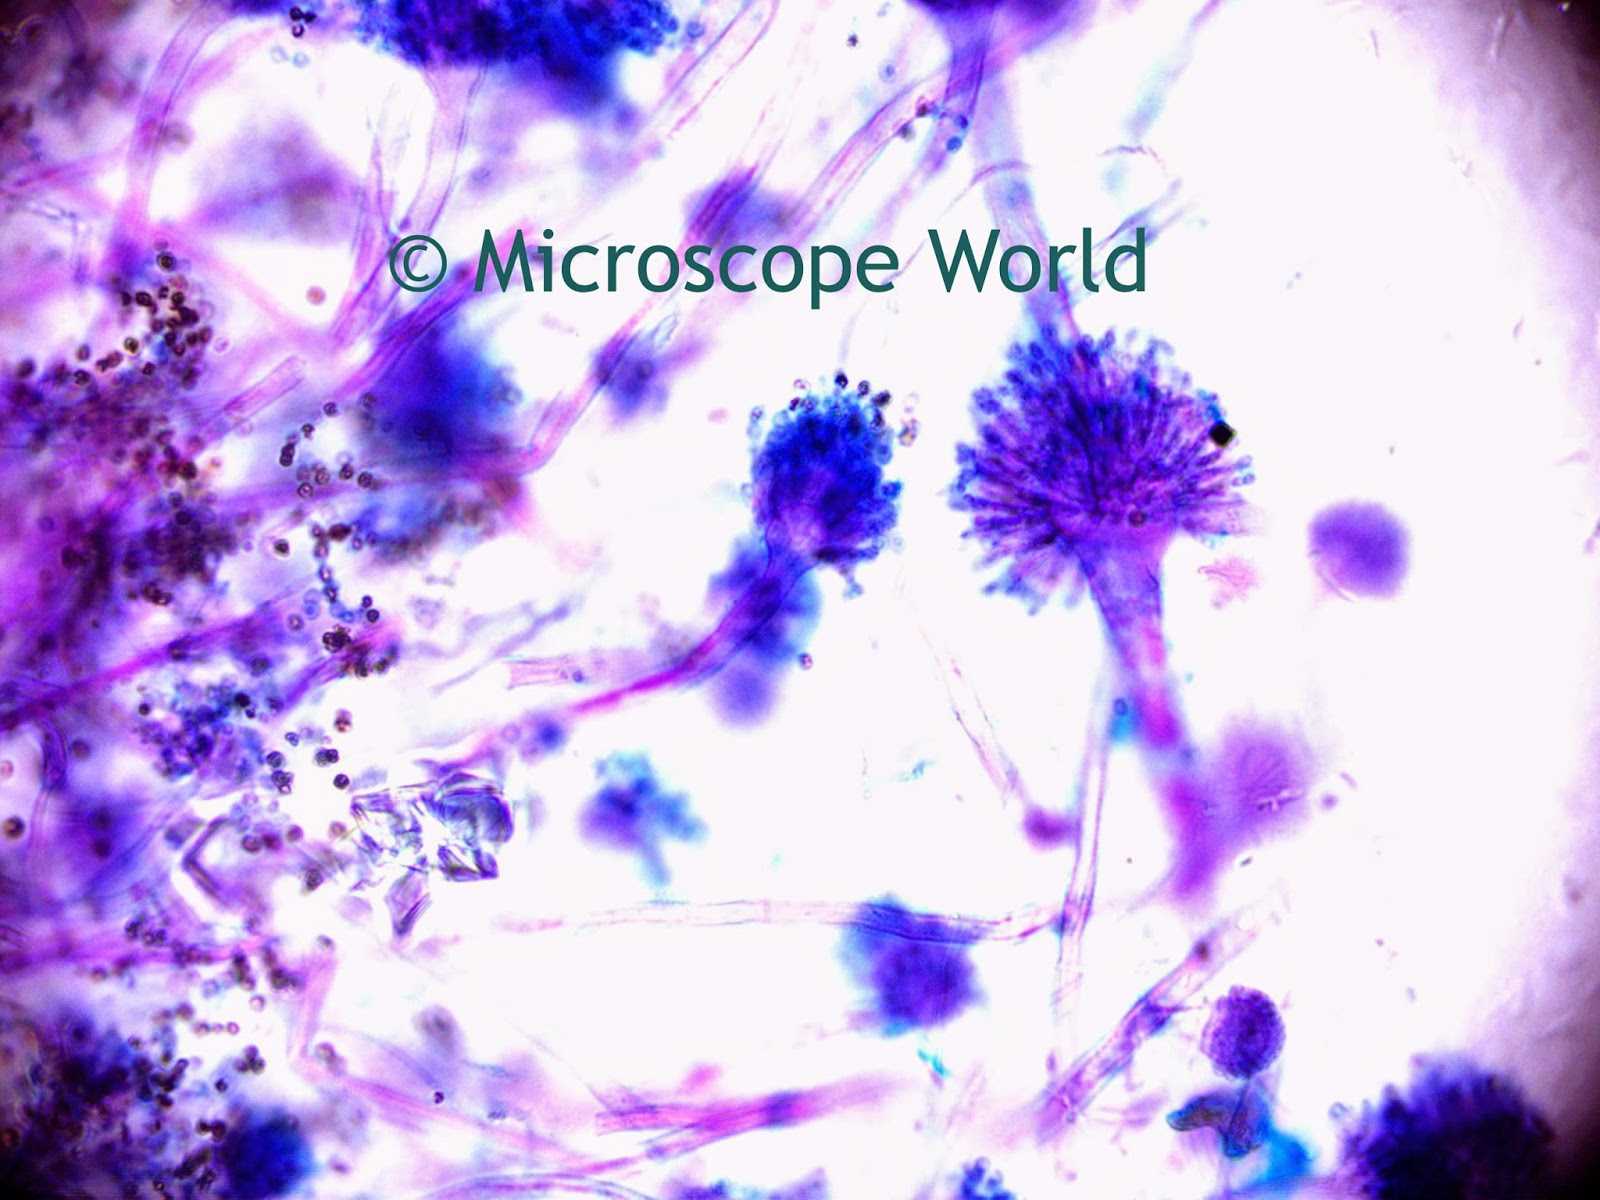 mold under the microscope at 400x